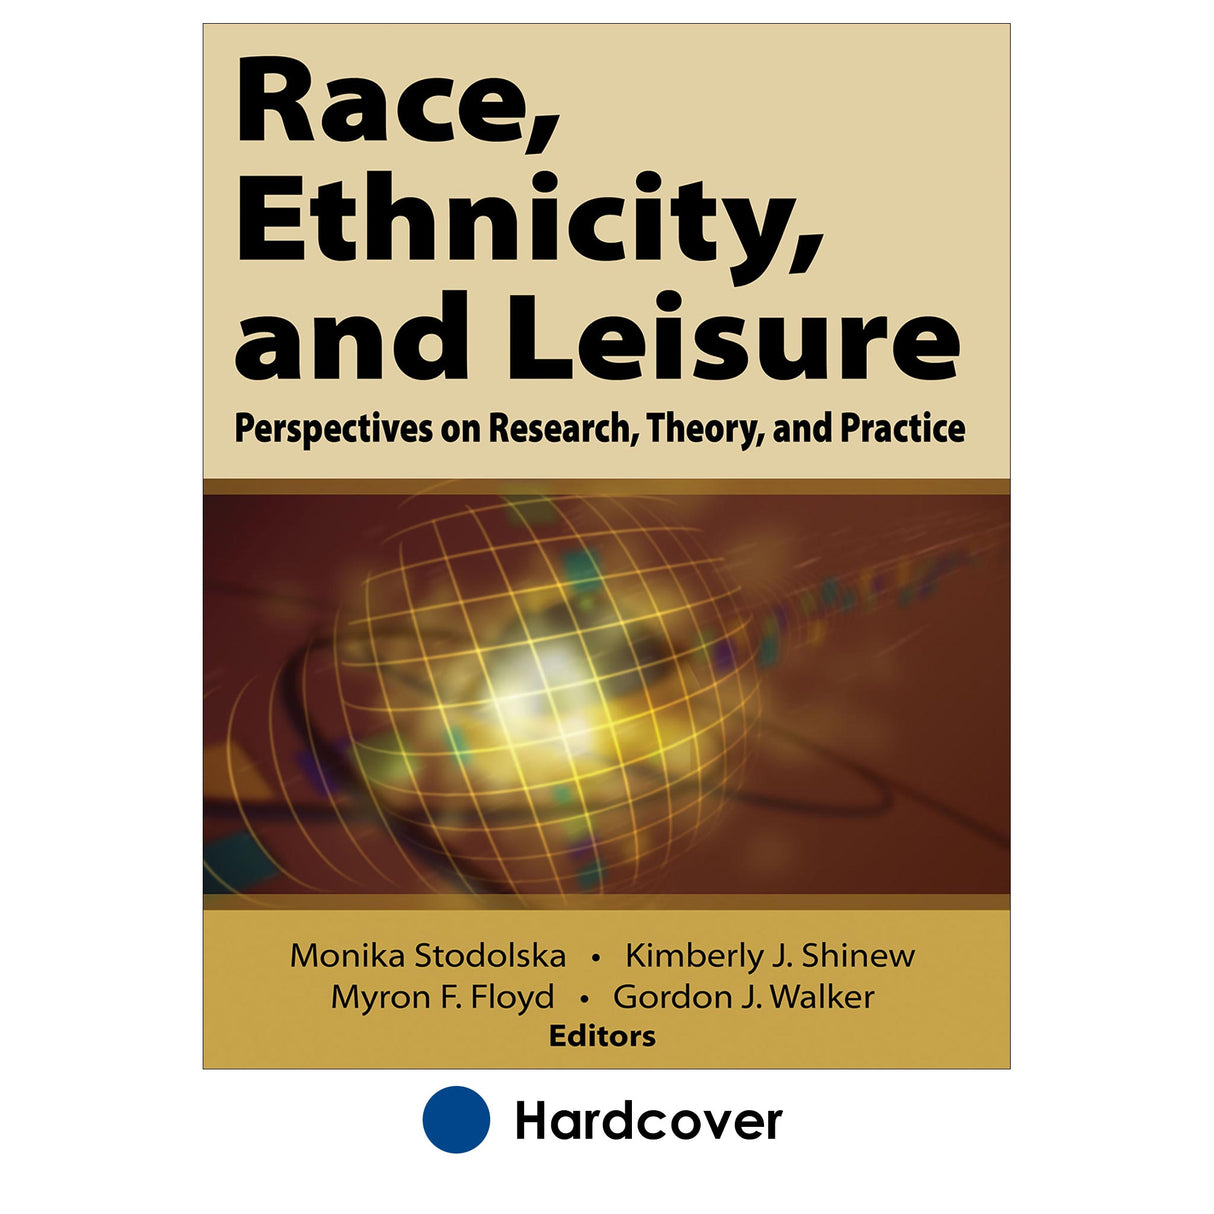 Race, Ethnicity, and Leisure